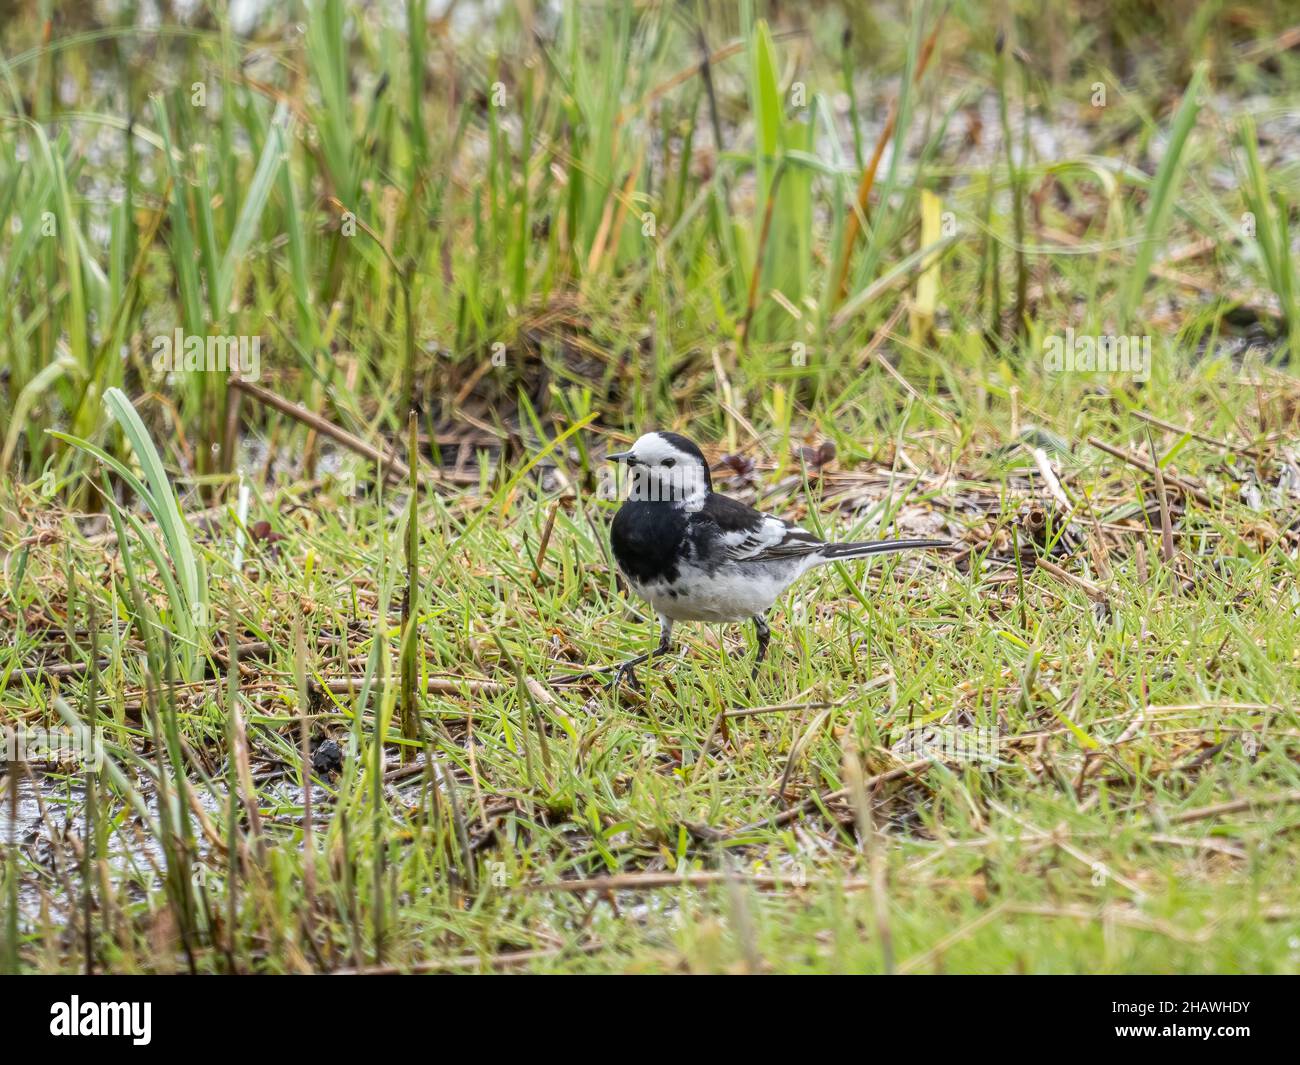 A pied wagtail (Motacilla alba) in the RSPB Leighton Moss nature reserve in Cumbria, England. Stock Photo